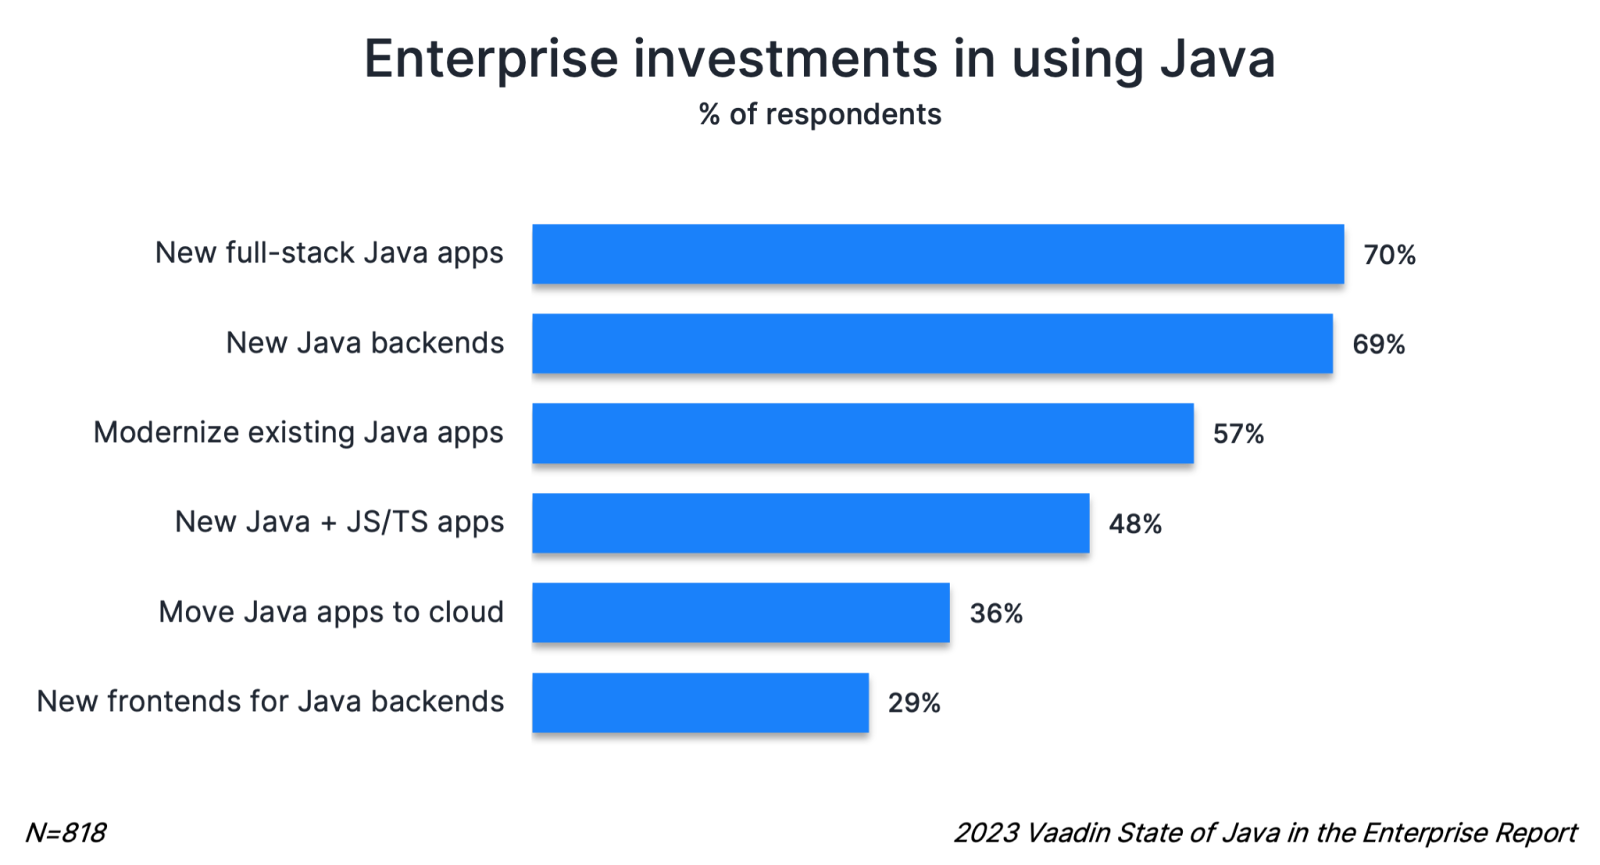 Graph showing how enterprises are investing in using Java.